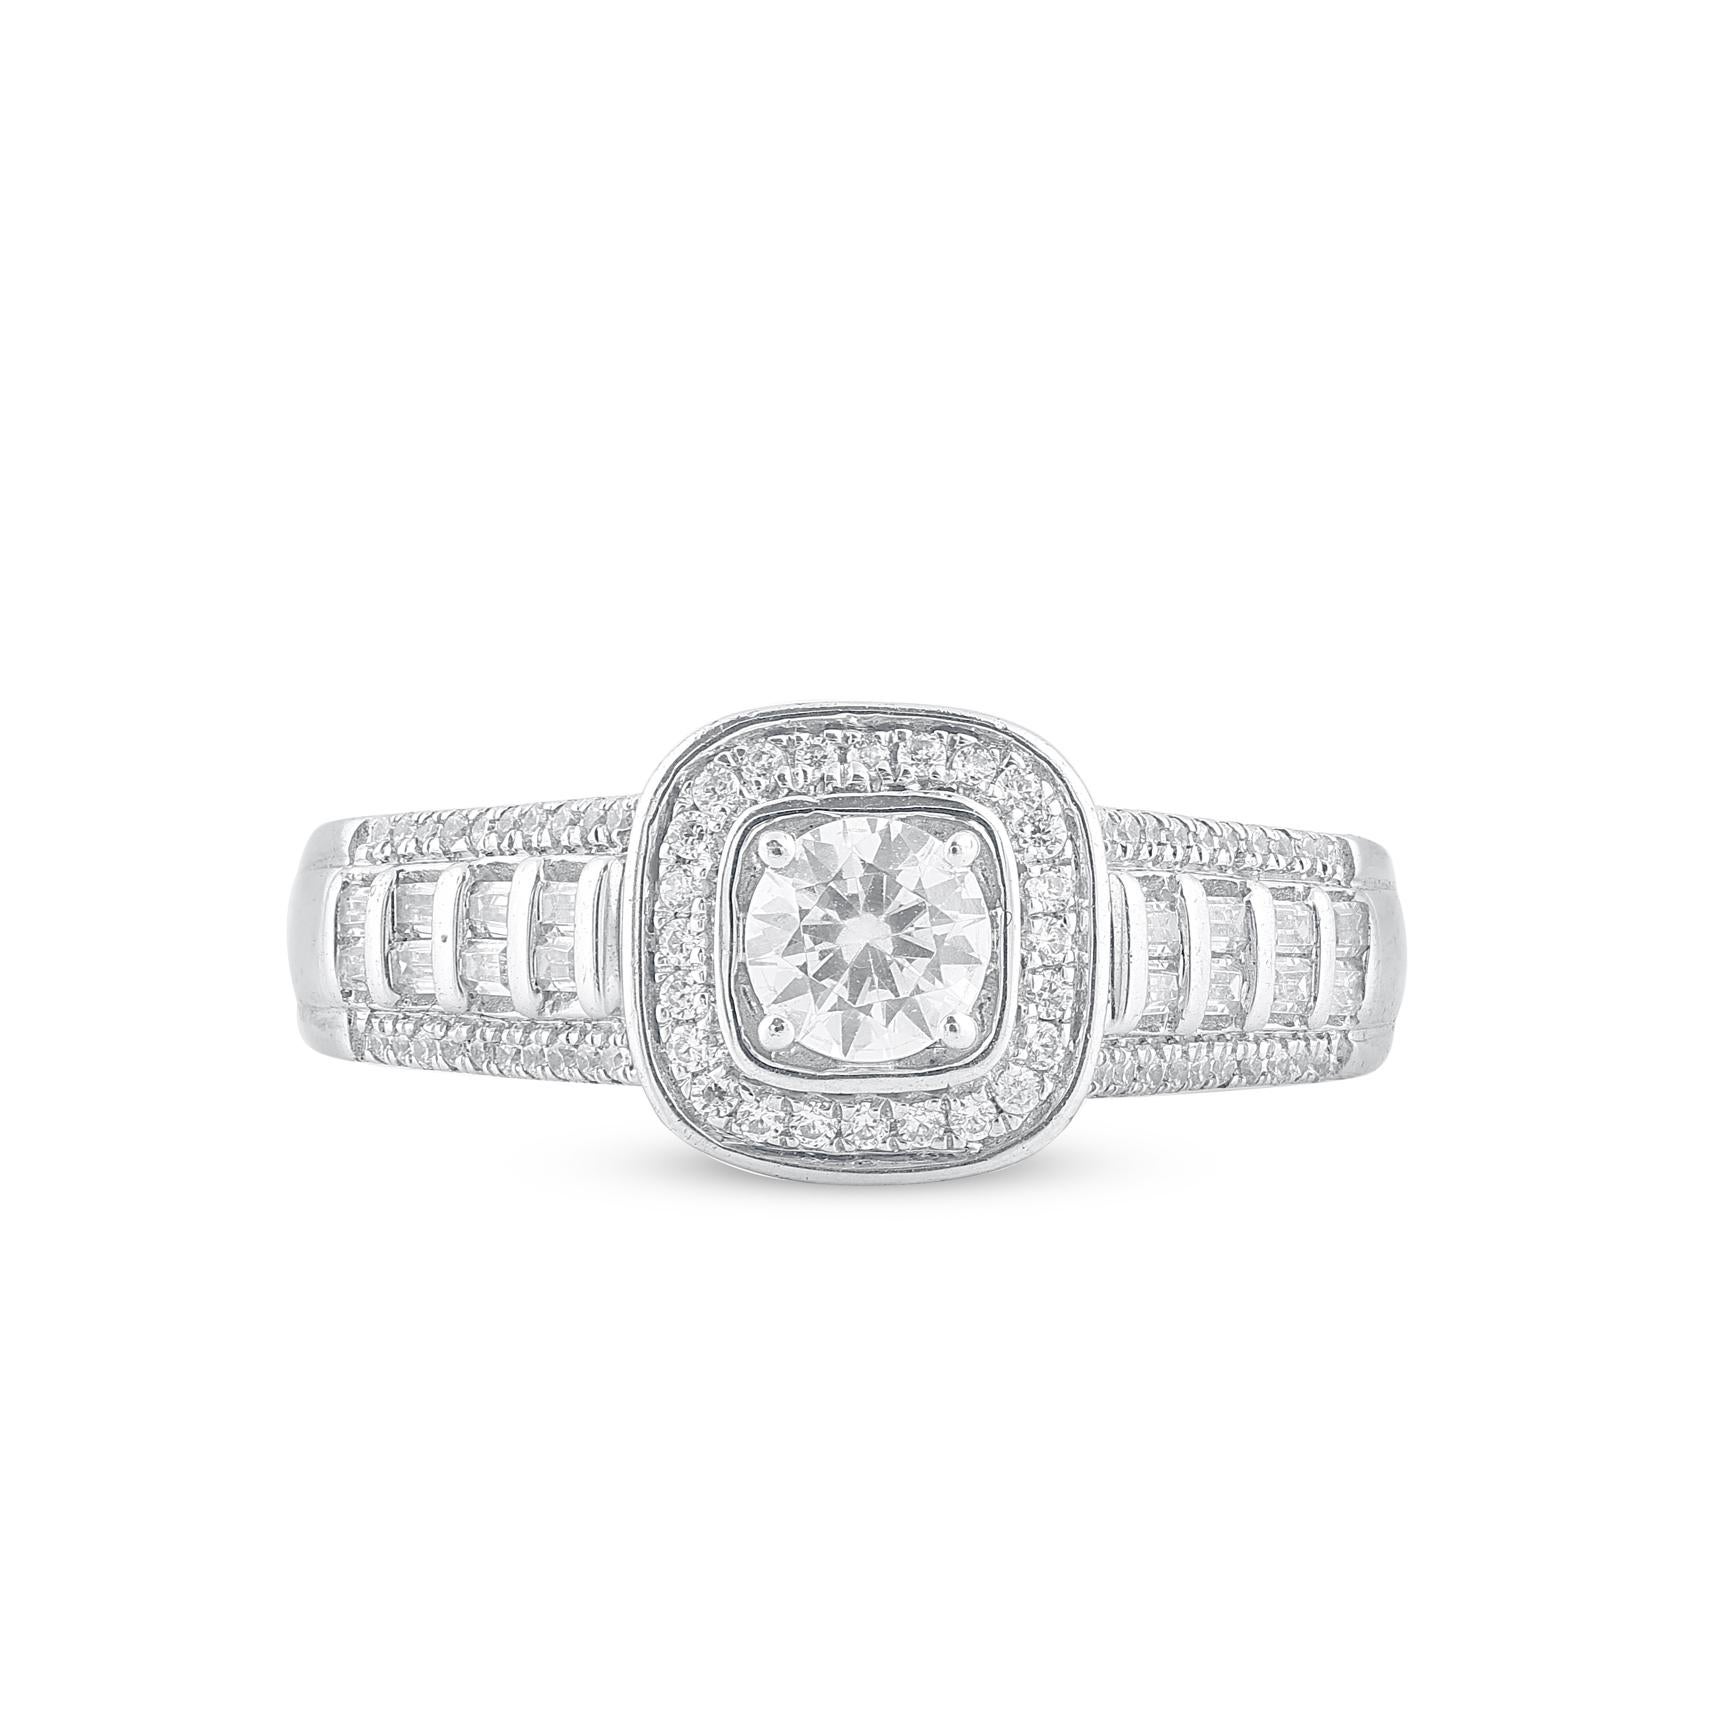 Make a bold statement of love with this engagement ring. Beautifully crafted by our inhouse experts in 14 karat white gold and embellished with 79 brilliant cut and single cut round diamond set in prong, pave and channel setting. Total diamond